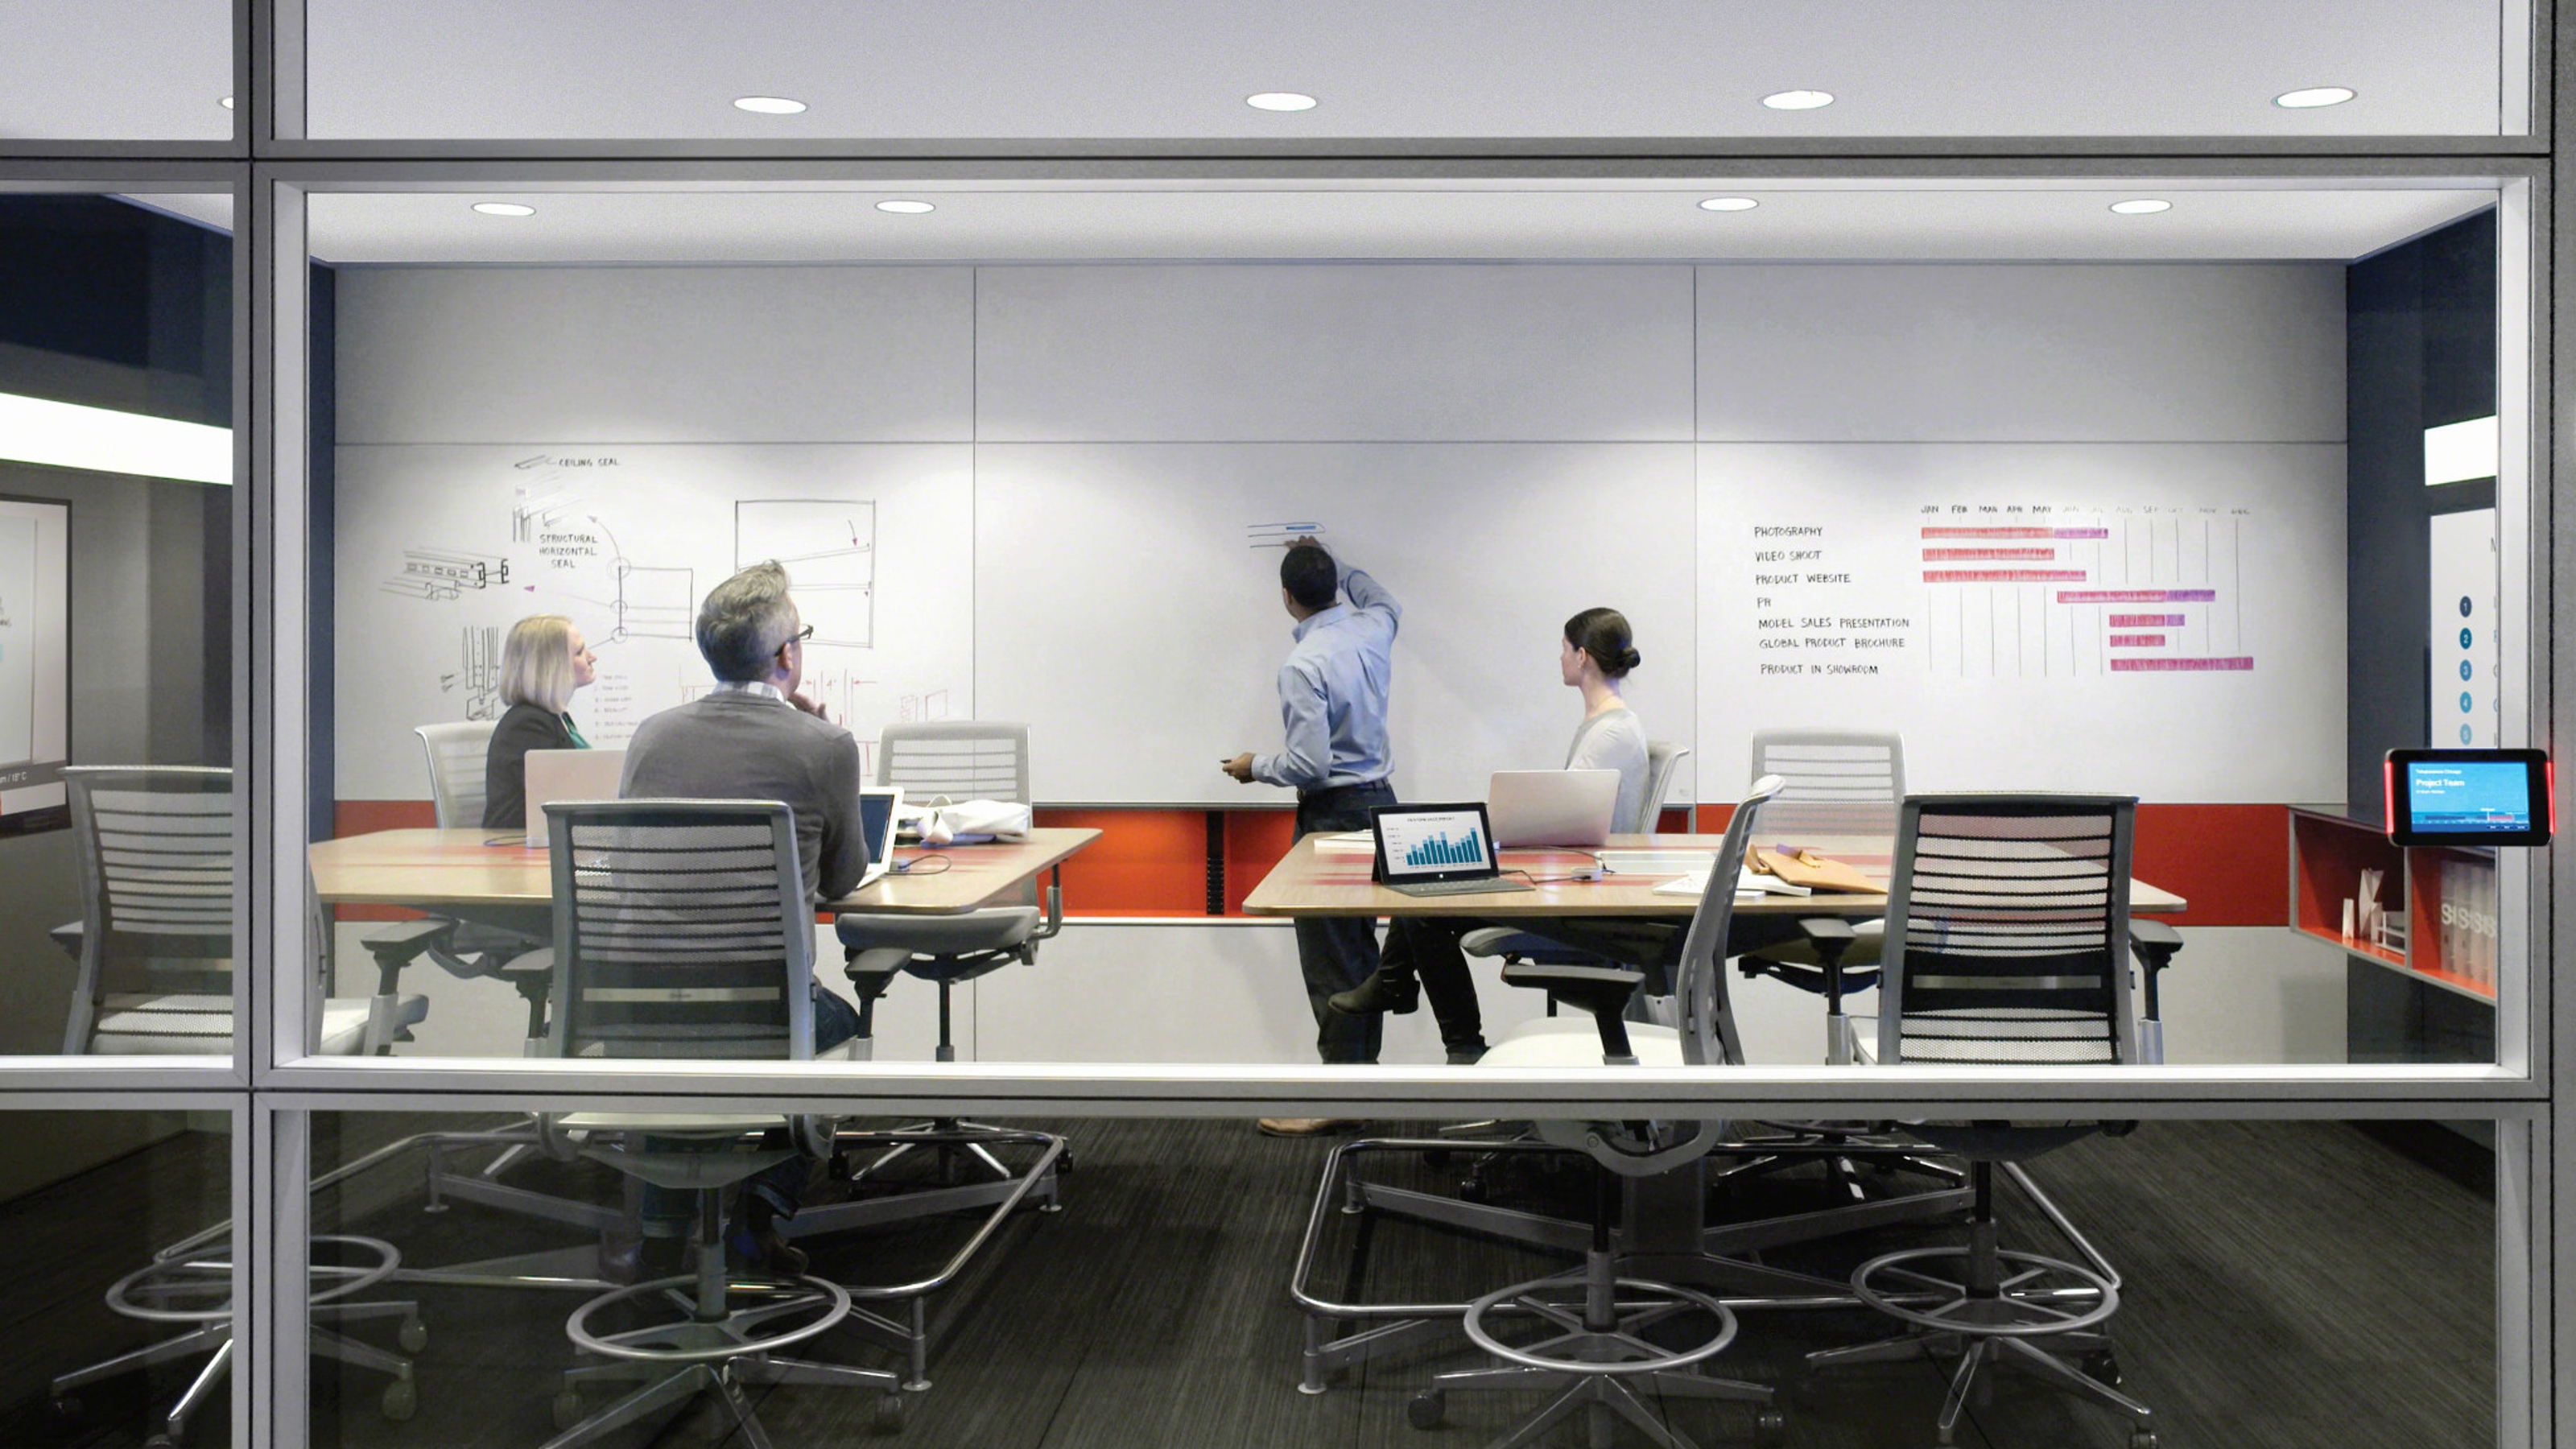 How Place Fosters Innovation - Steelcase